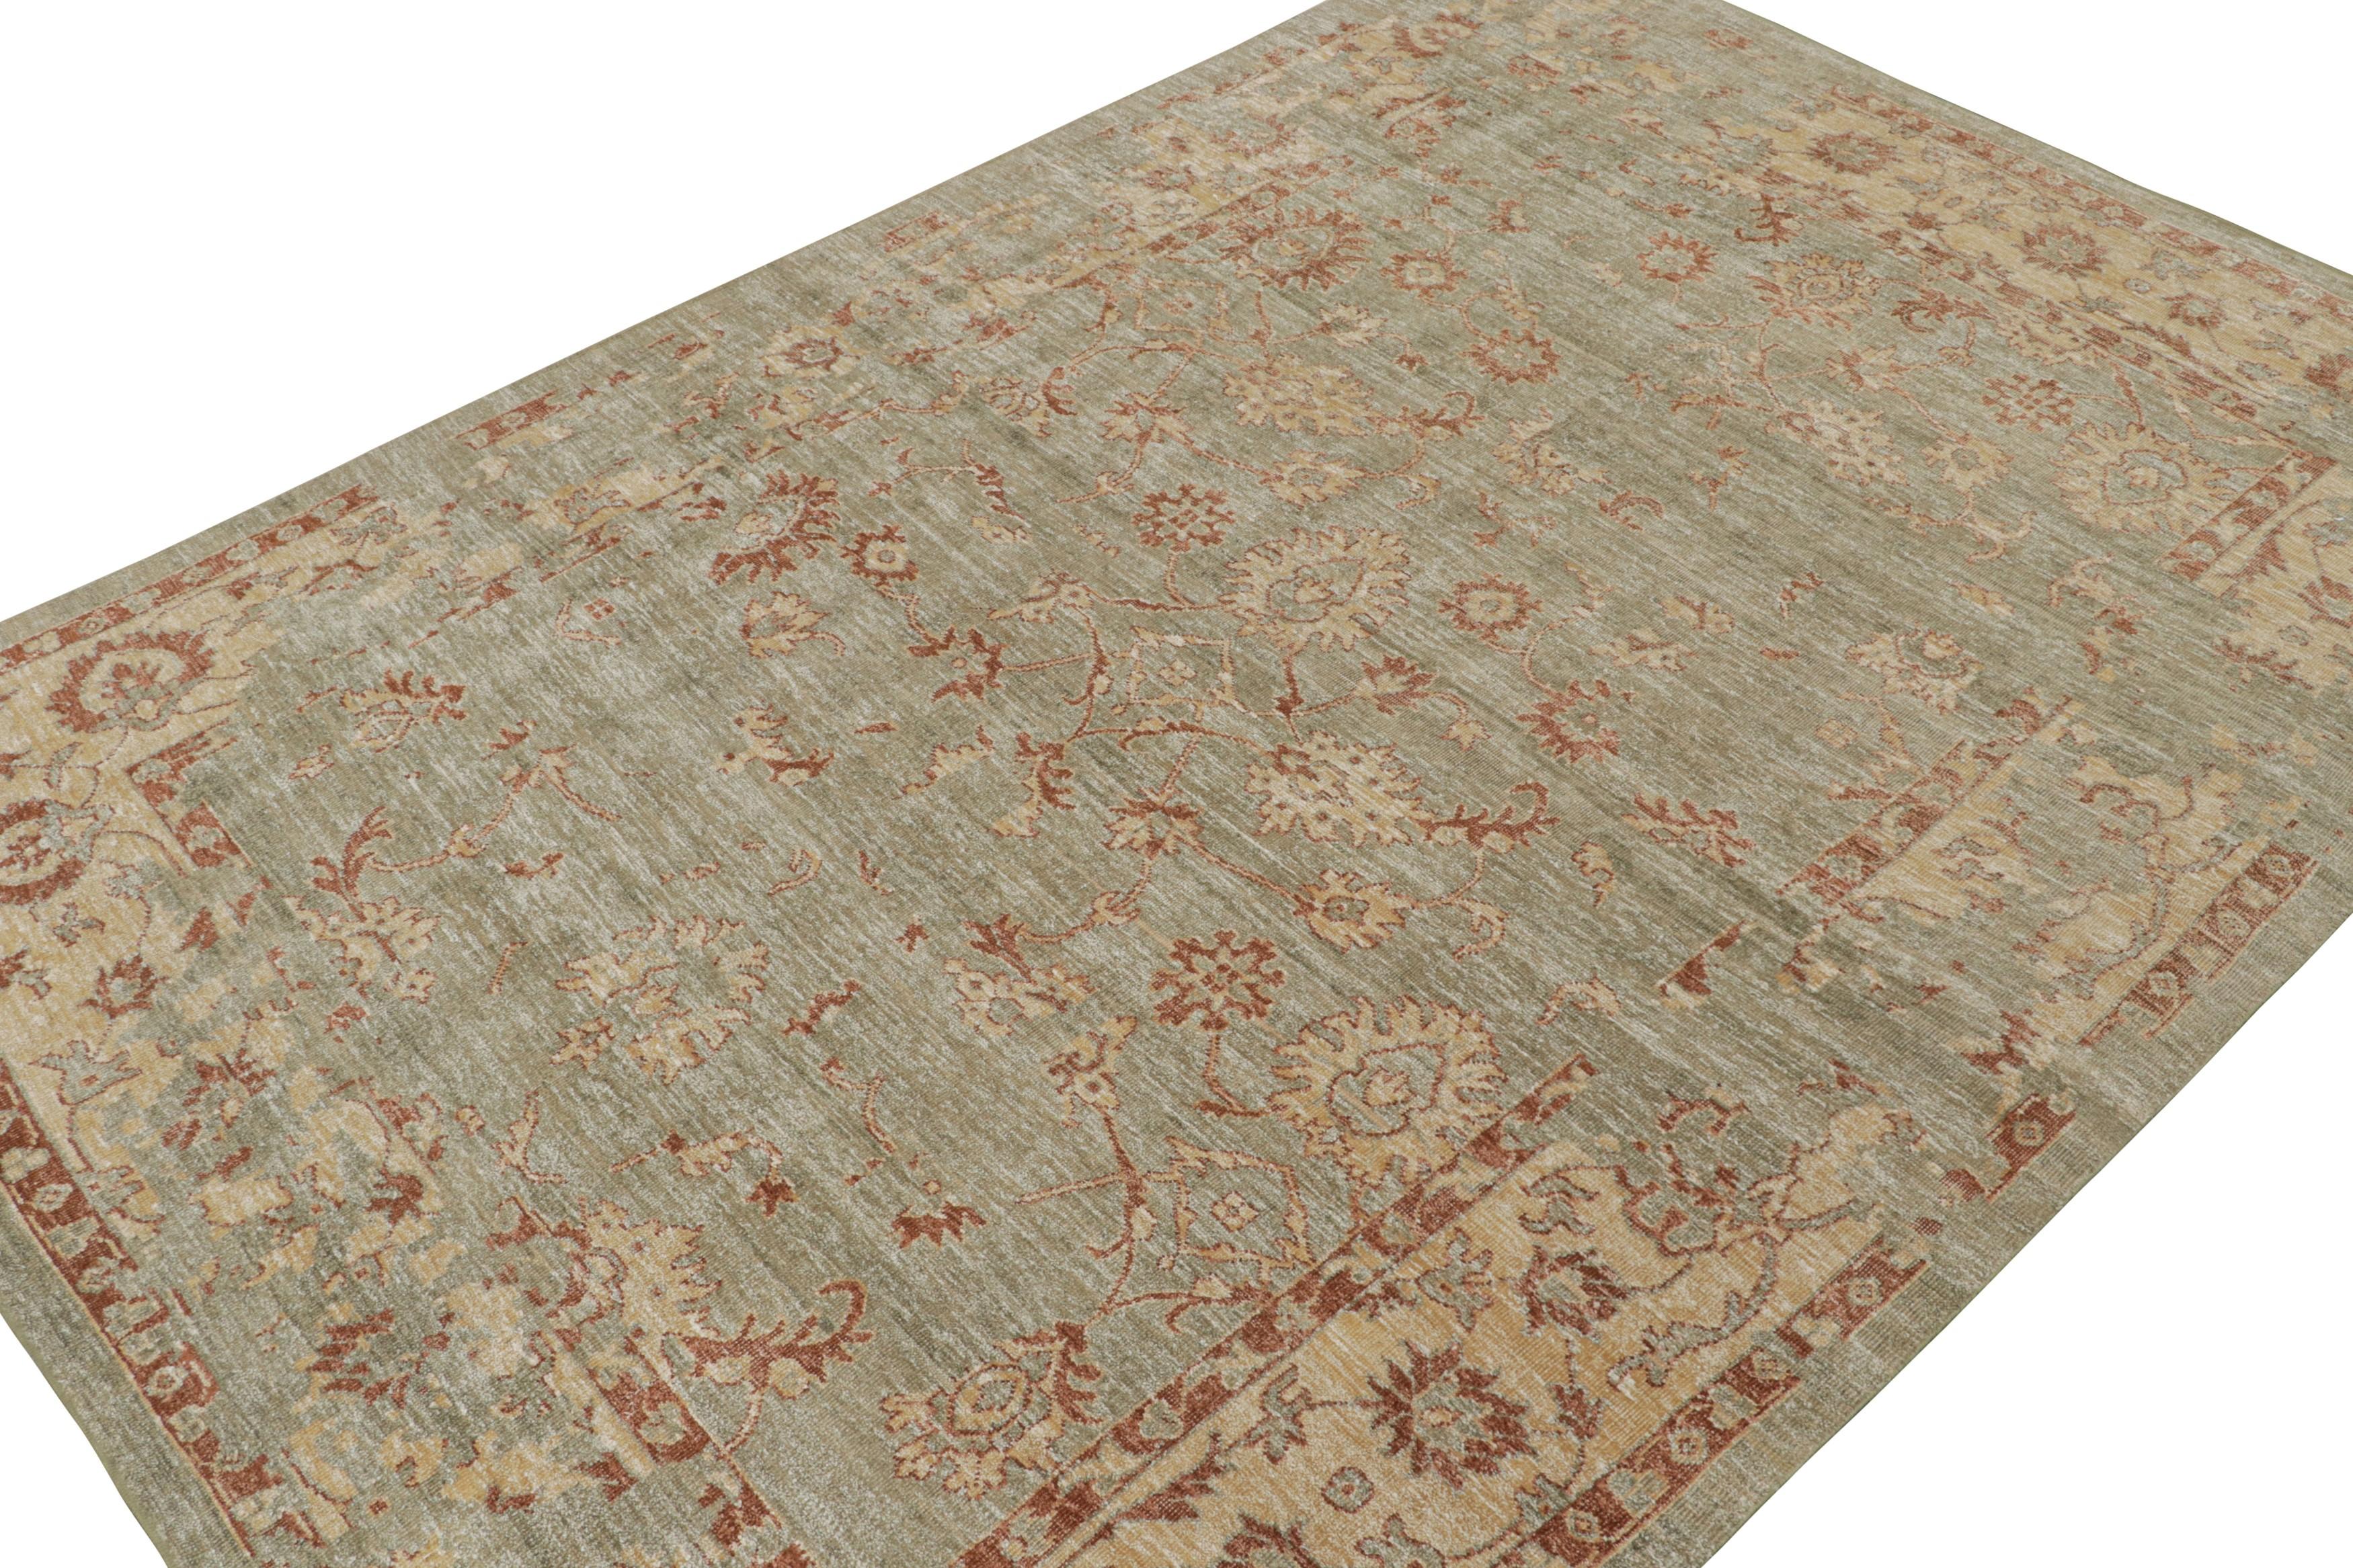 This 10x14 rug from the Modern Classics Collection by Rug & Kilim is from a new line inspired by antique Oushak rugs. Hand-knotted in silk, its design enjoys rust and gold floral patterns on a beige field with sage green accents. 

On the